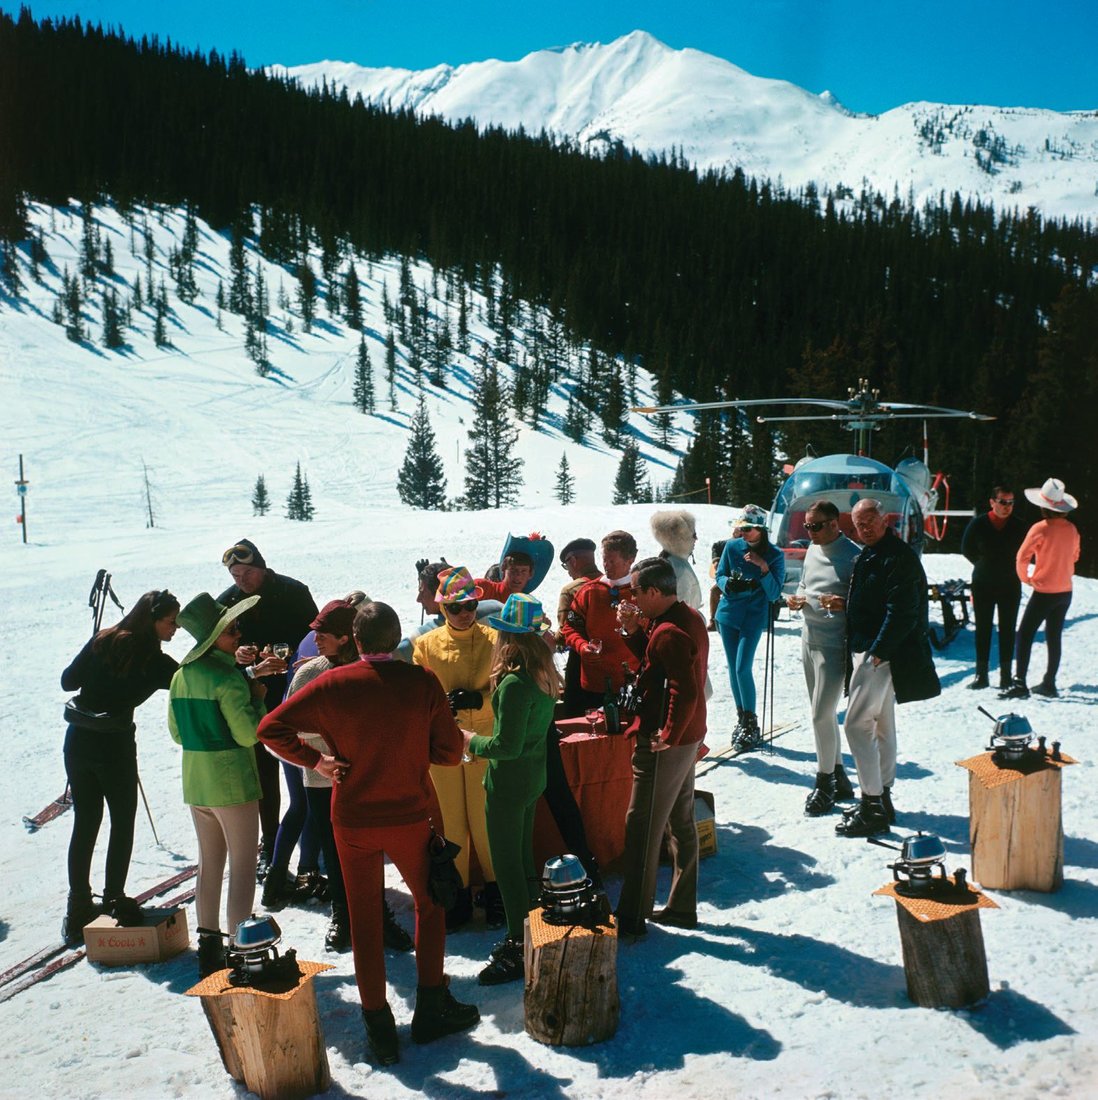 A stand-up fondue picnic organized by Holiday magazine held for skiers. The guest list included Howard Head, Stein Eriksen and more. PHOTO BY SLIM AARONS/STRINGER/COURTESY OF GETTY